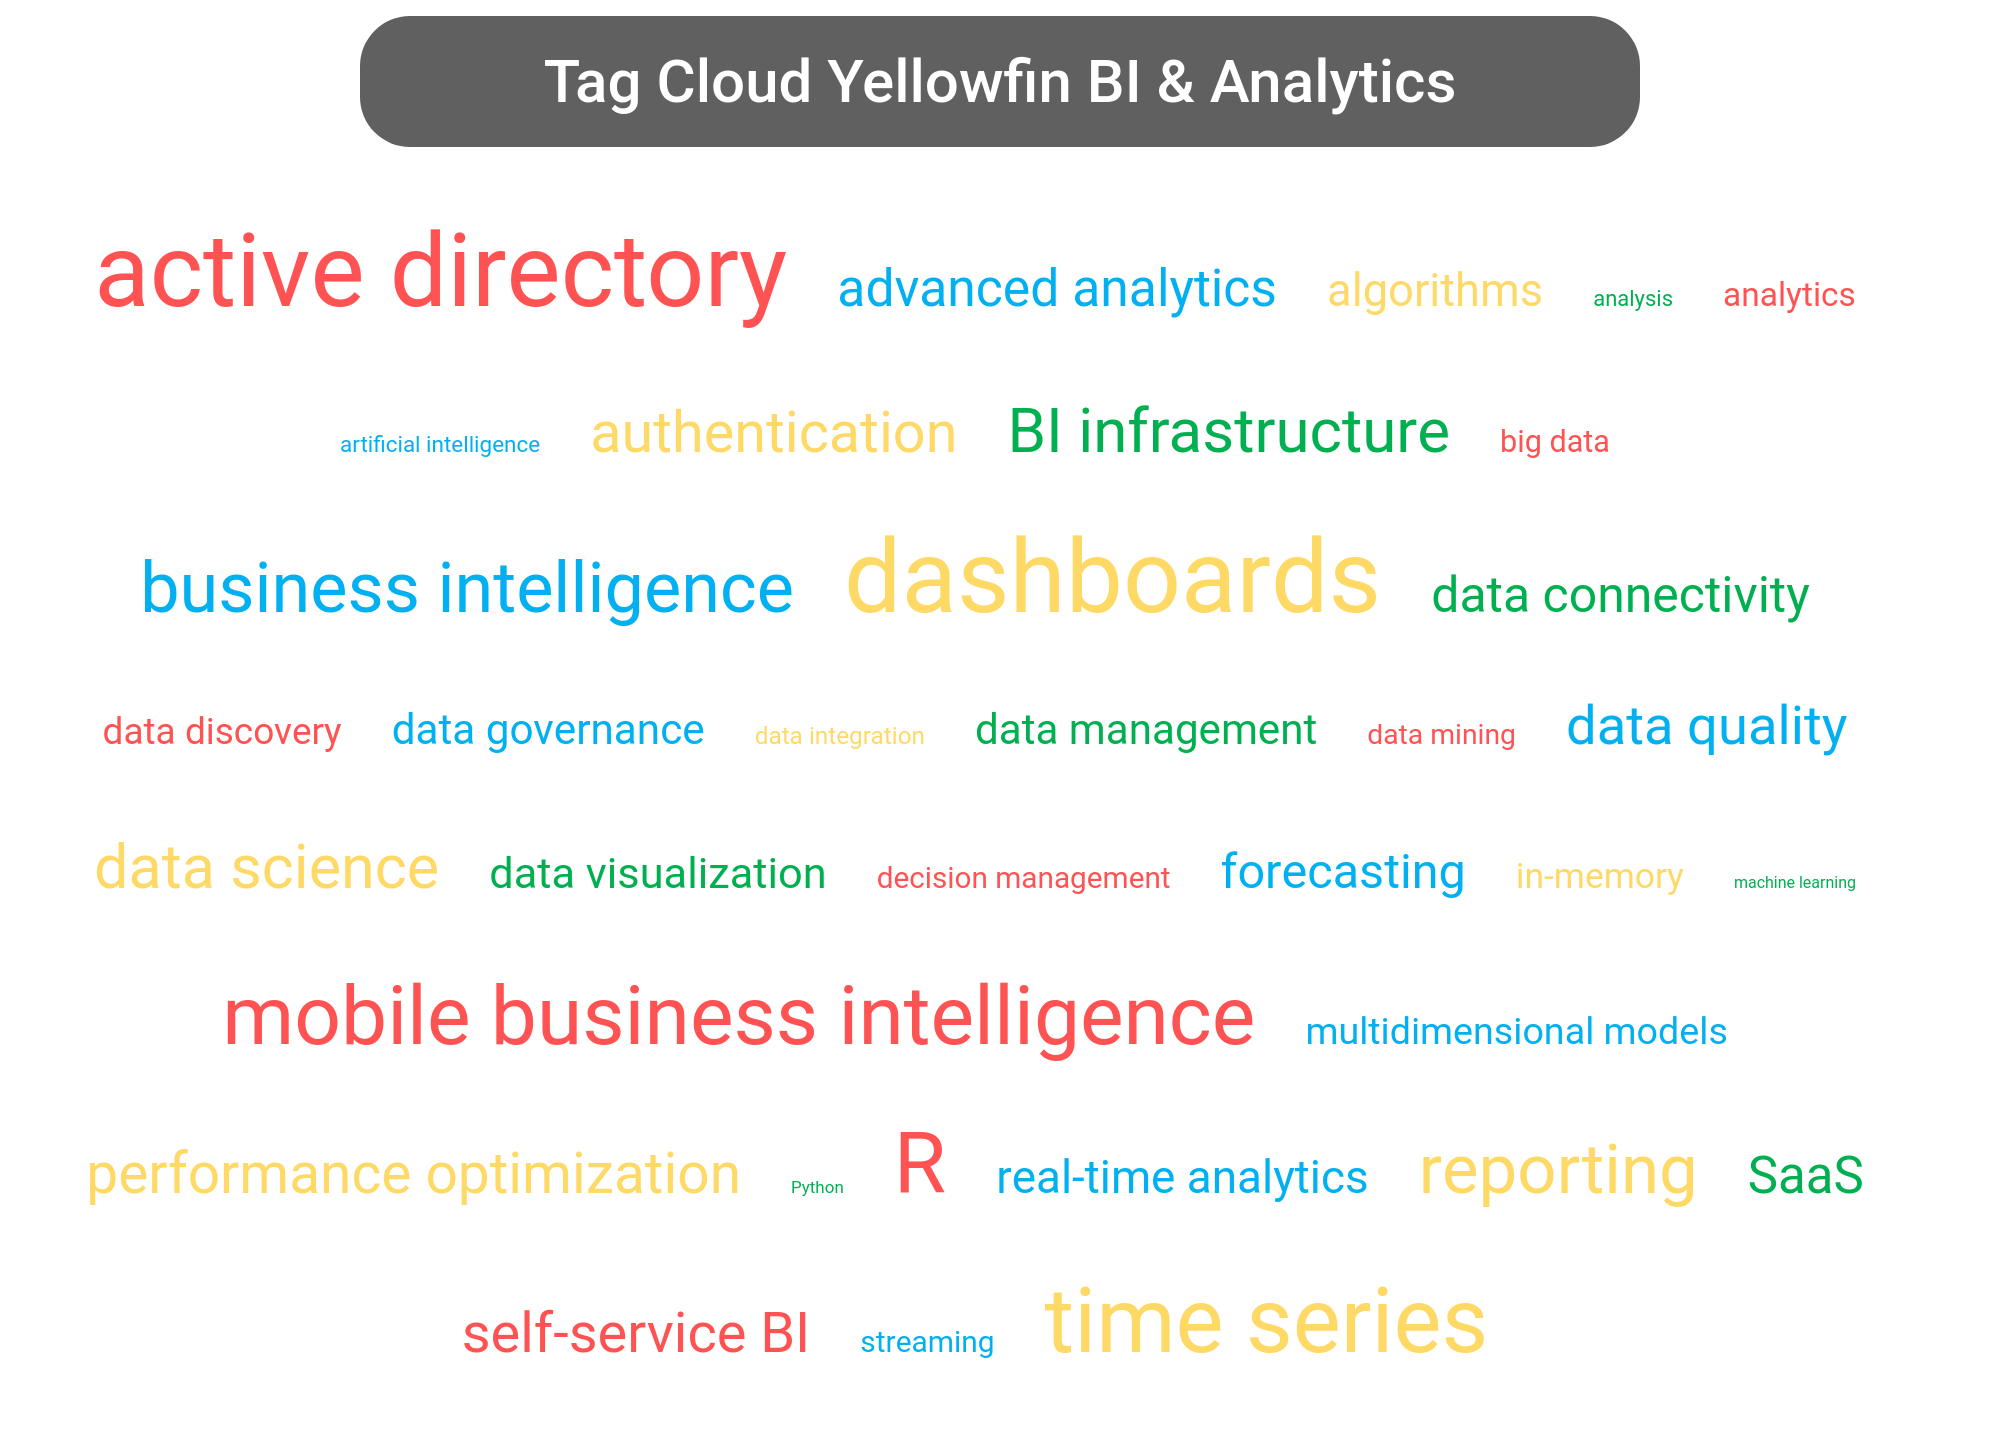 Tag cloud of the Yellowfin Business Analytics tools.